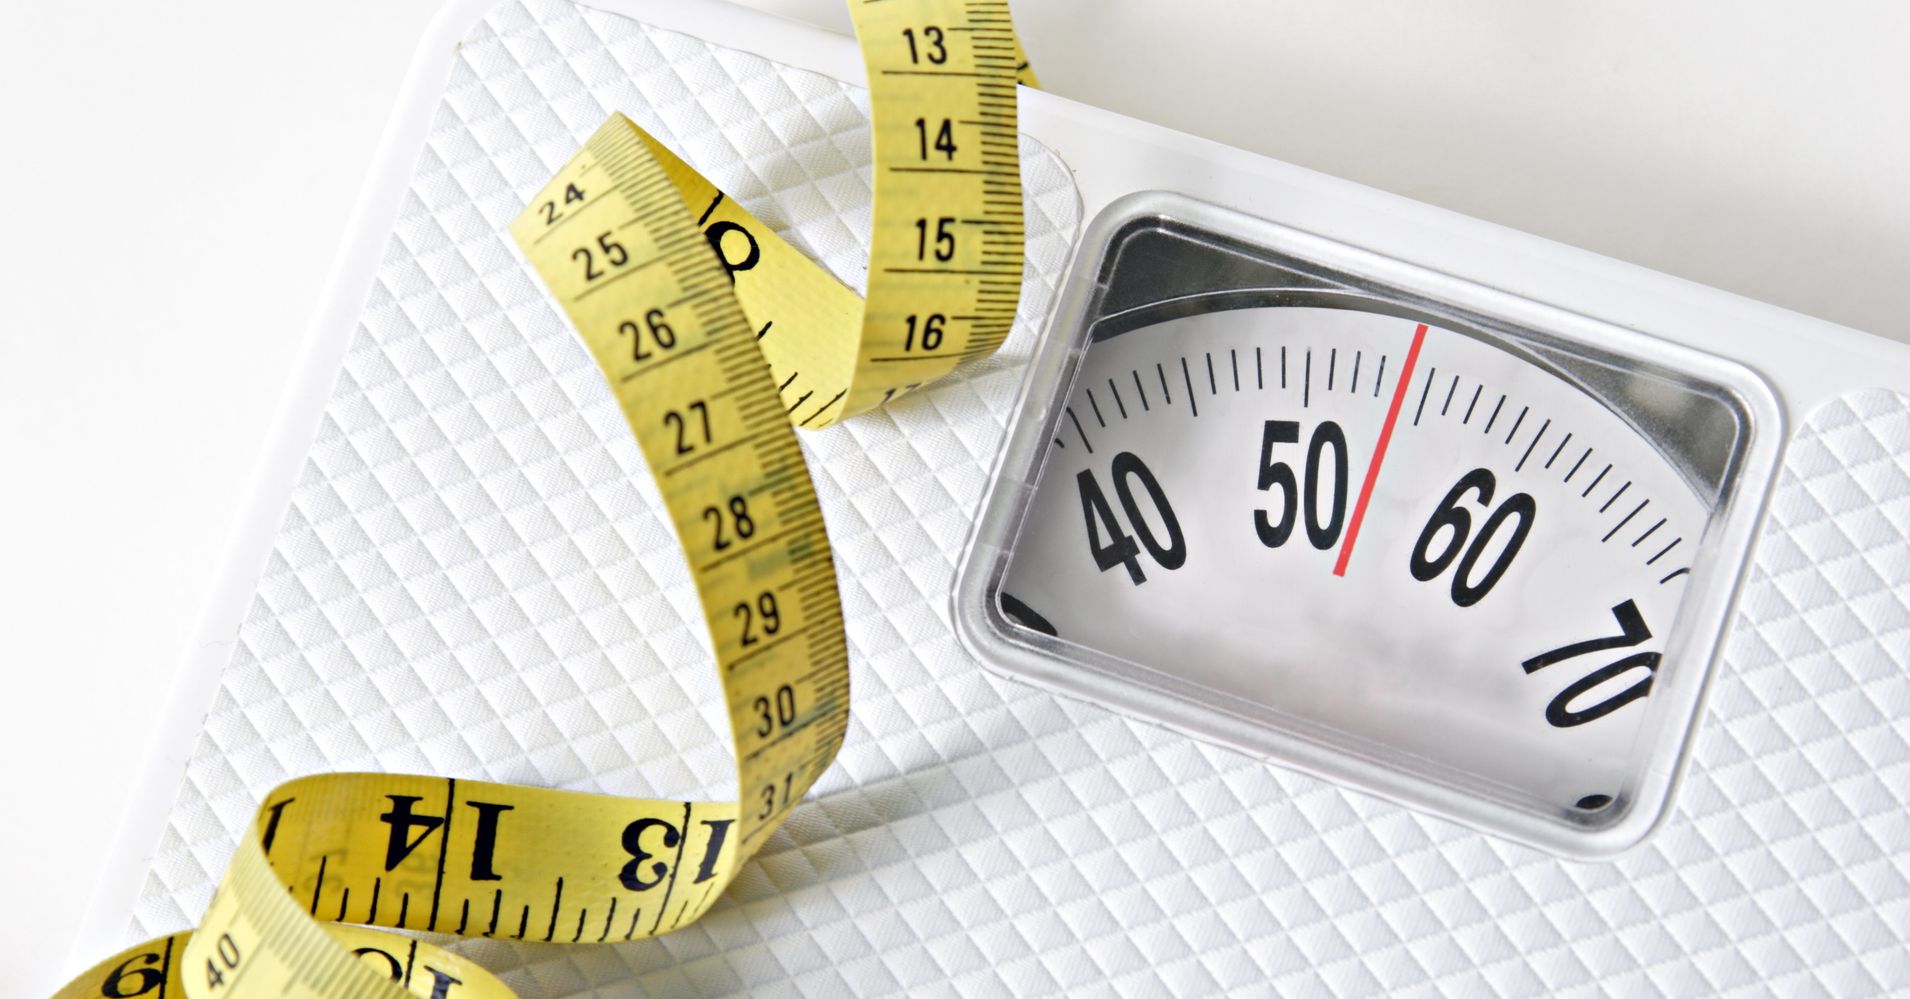 BMI Chart: Why It's A Bad Idea To Trust It | HuffPost